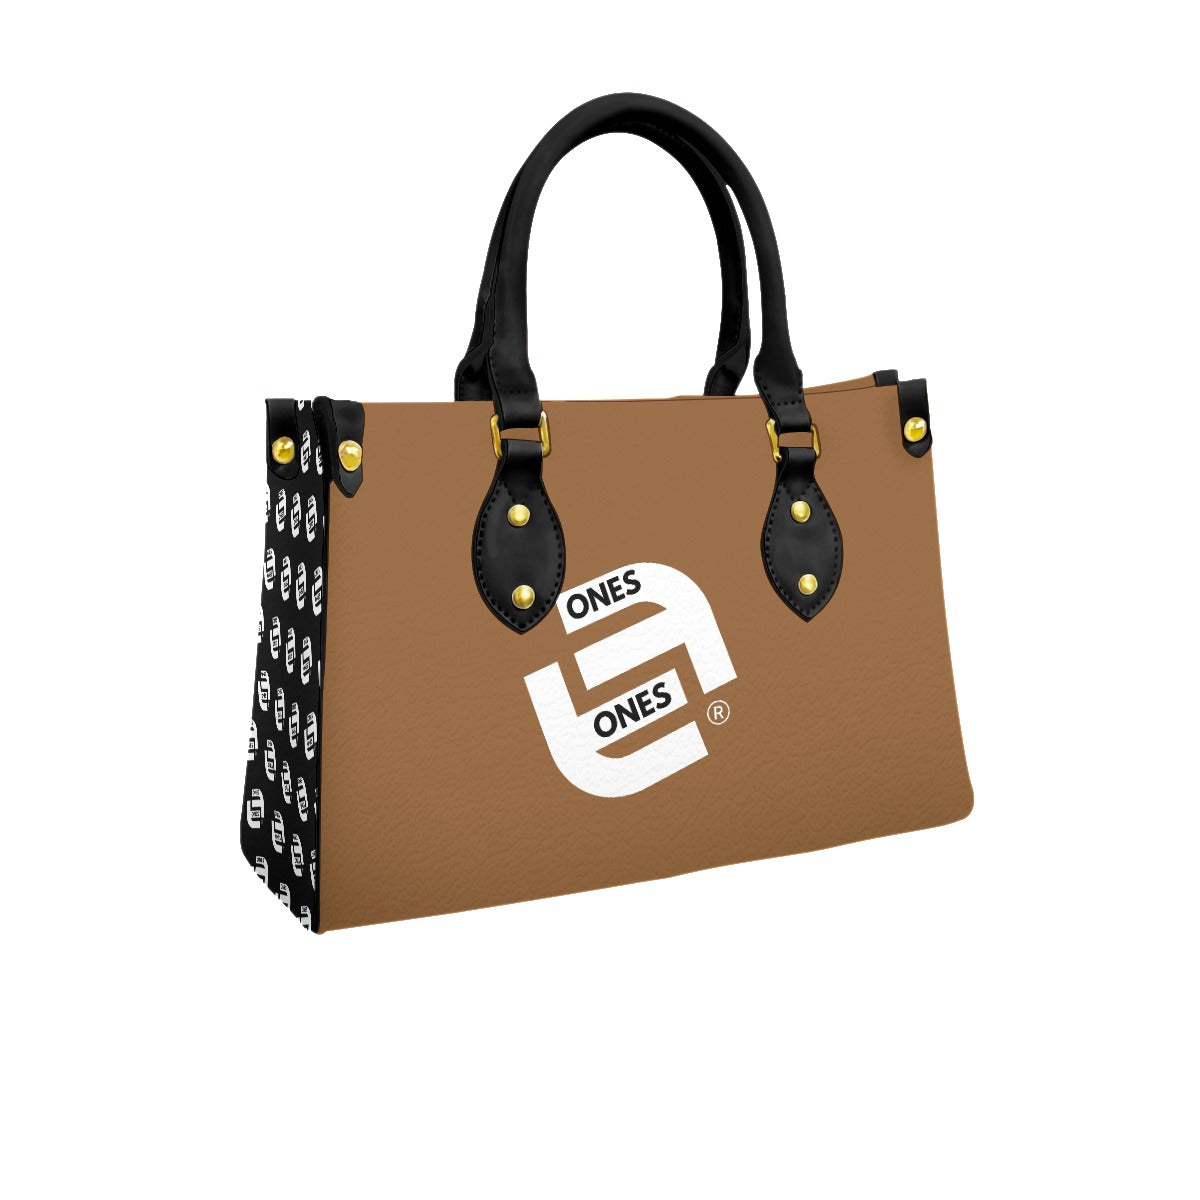 FEARLESS ONES Tote Bag With Black Handle FOR WOMEN